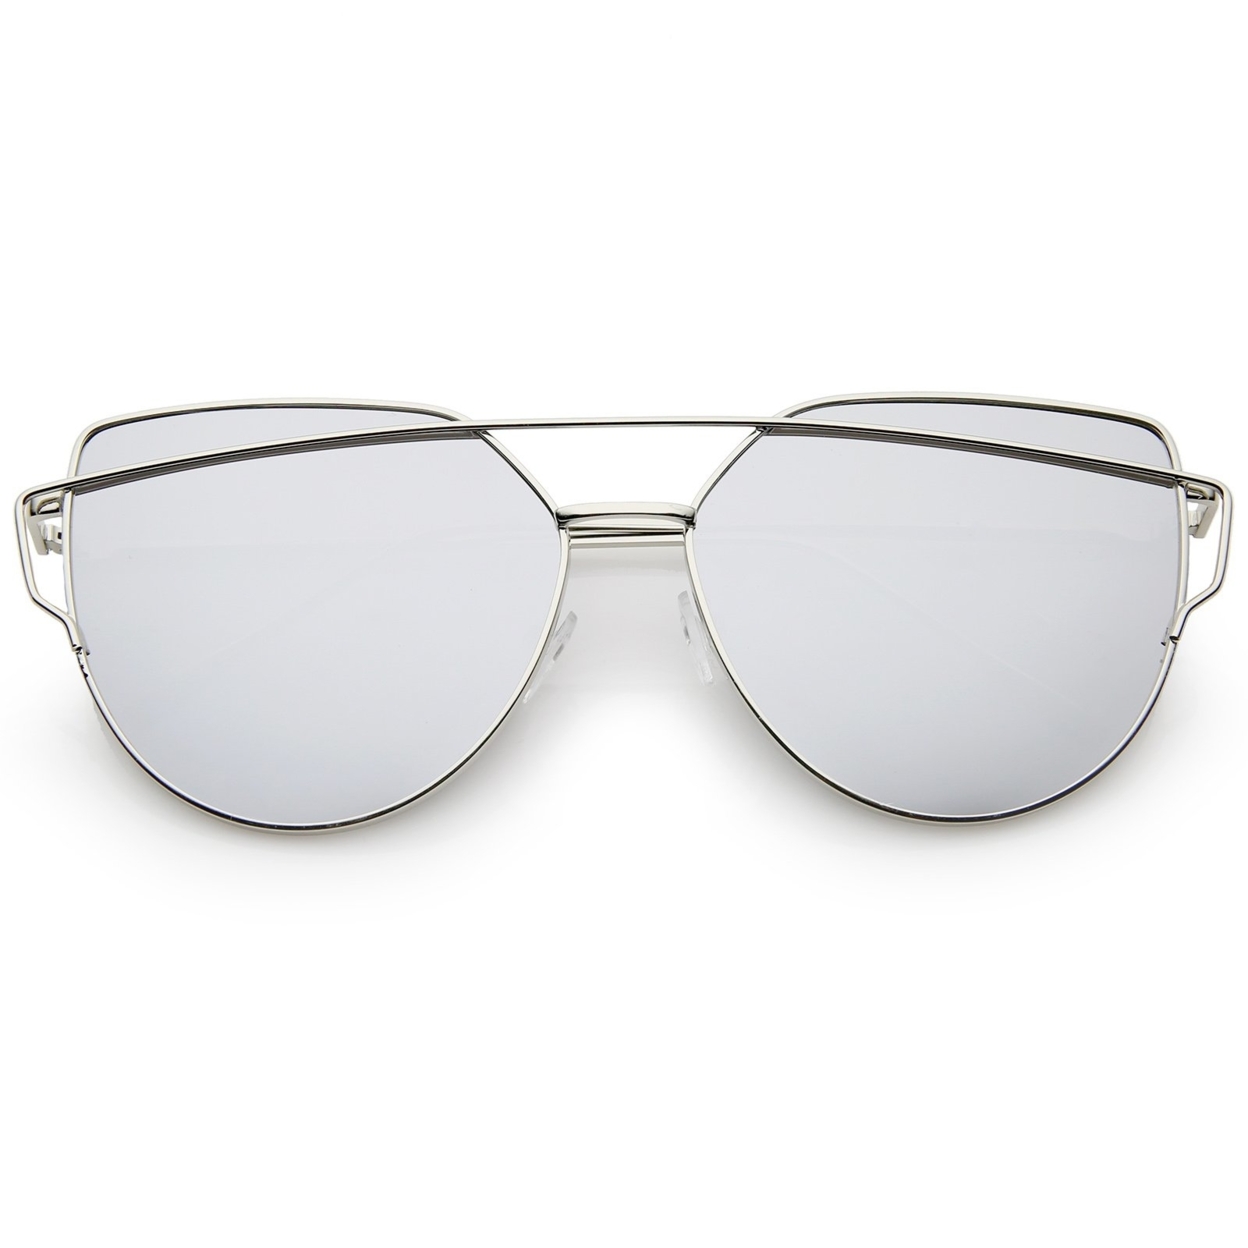 Oversize Metal Frame Thin Temple Color Mirror Flat Lens Aviator Sunglasses 62mm - Silver / Silver Mirror